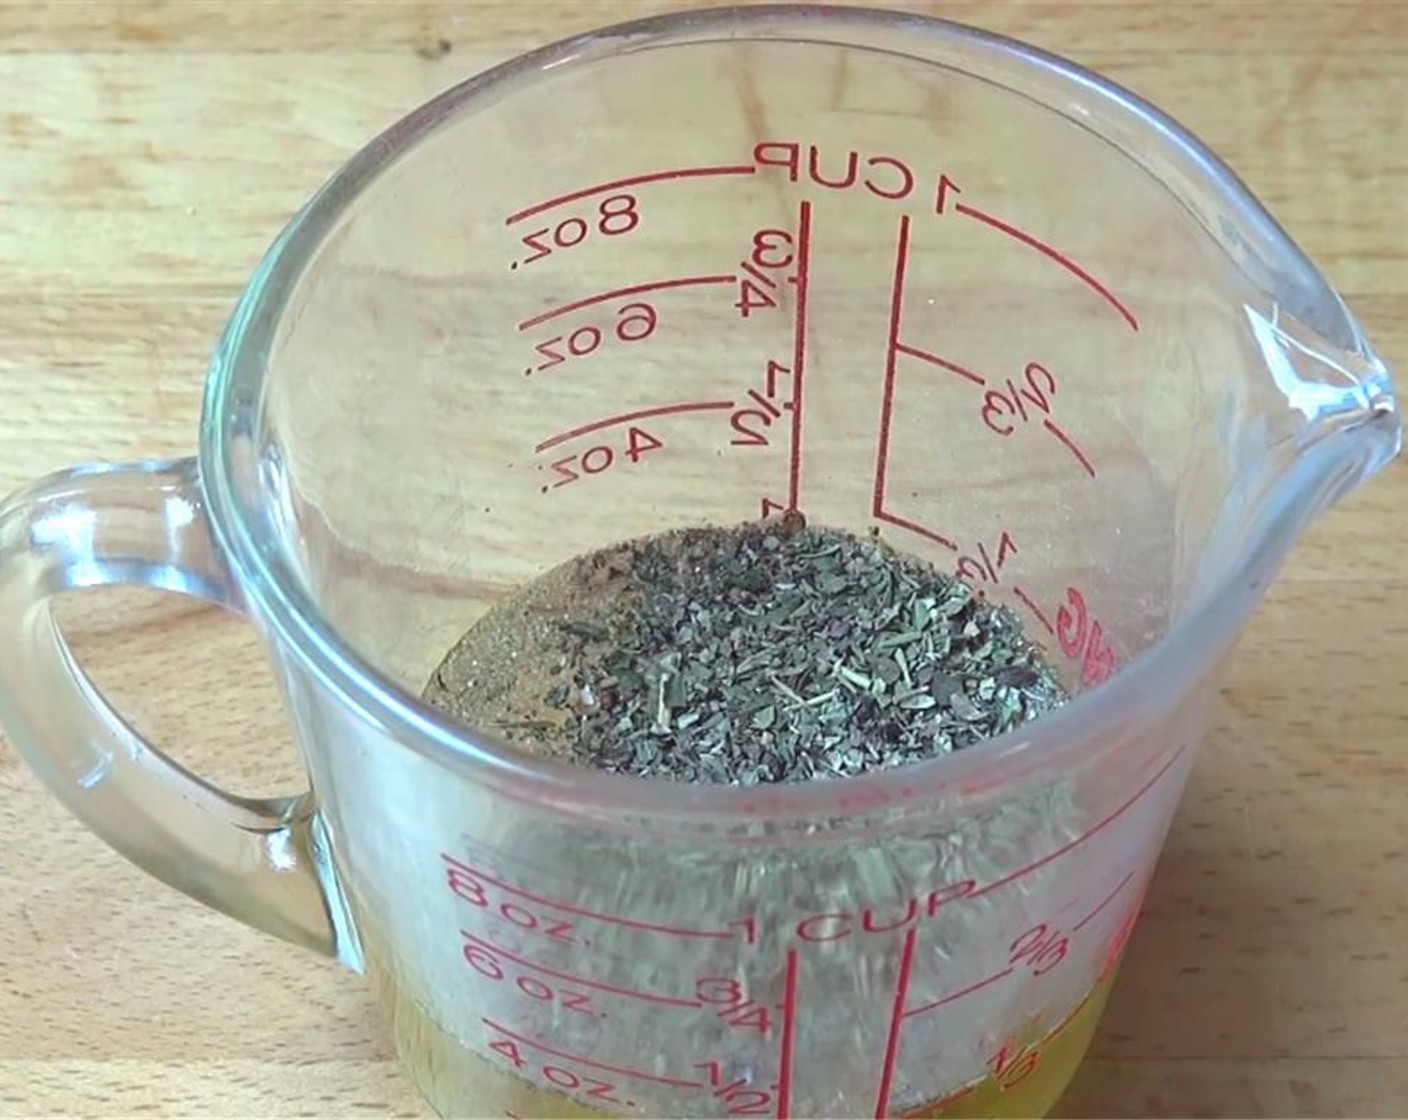 step 2 In a measuring cup mix Olive Oil (1/4 cup), McCormick® Garlic Powder (1 tsp), Onion Powder (1 tsp), and Dried Mixed Herbs (1/2 Tbsp). Season with Salt (to taste) and Ground Black Pepper (to taste) and mix well together.